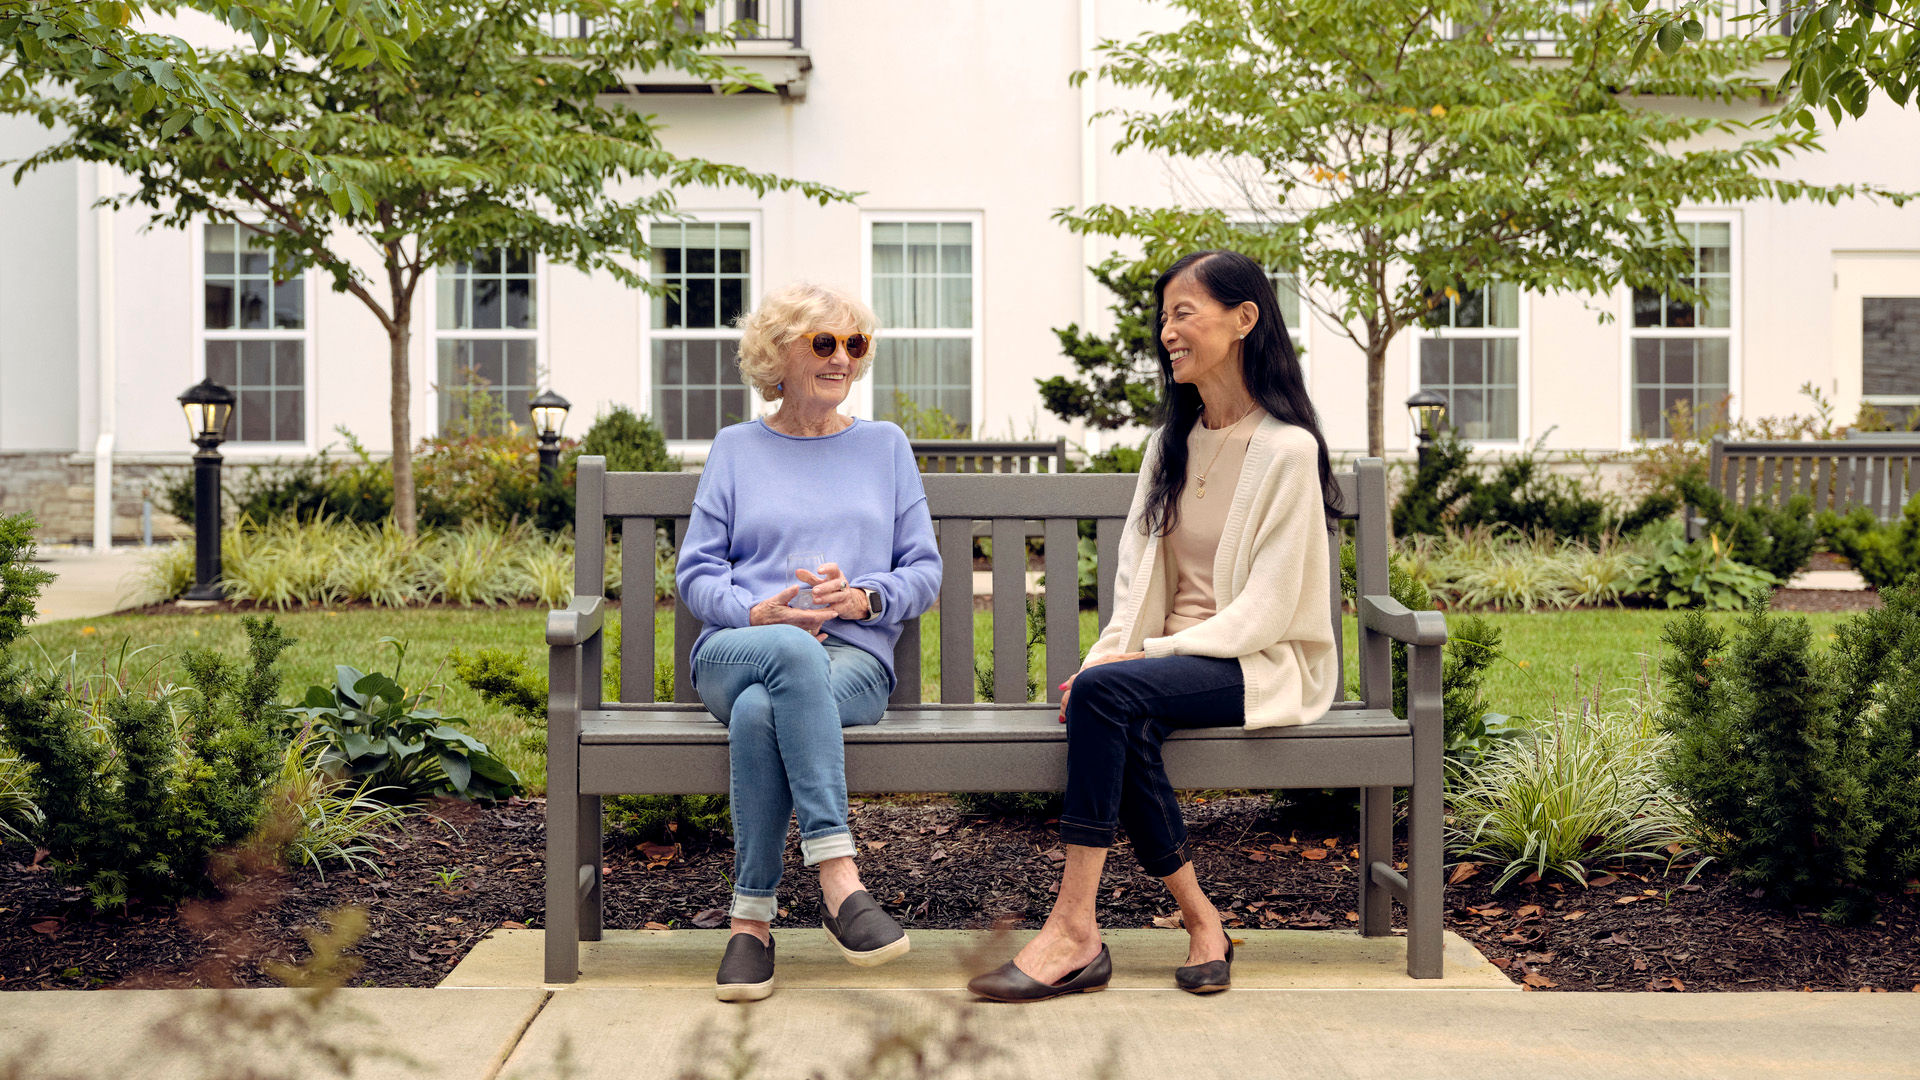 Two women sitting on a bench talking